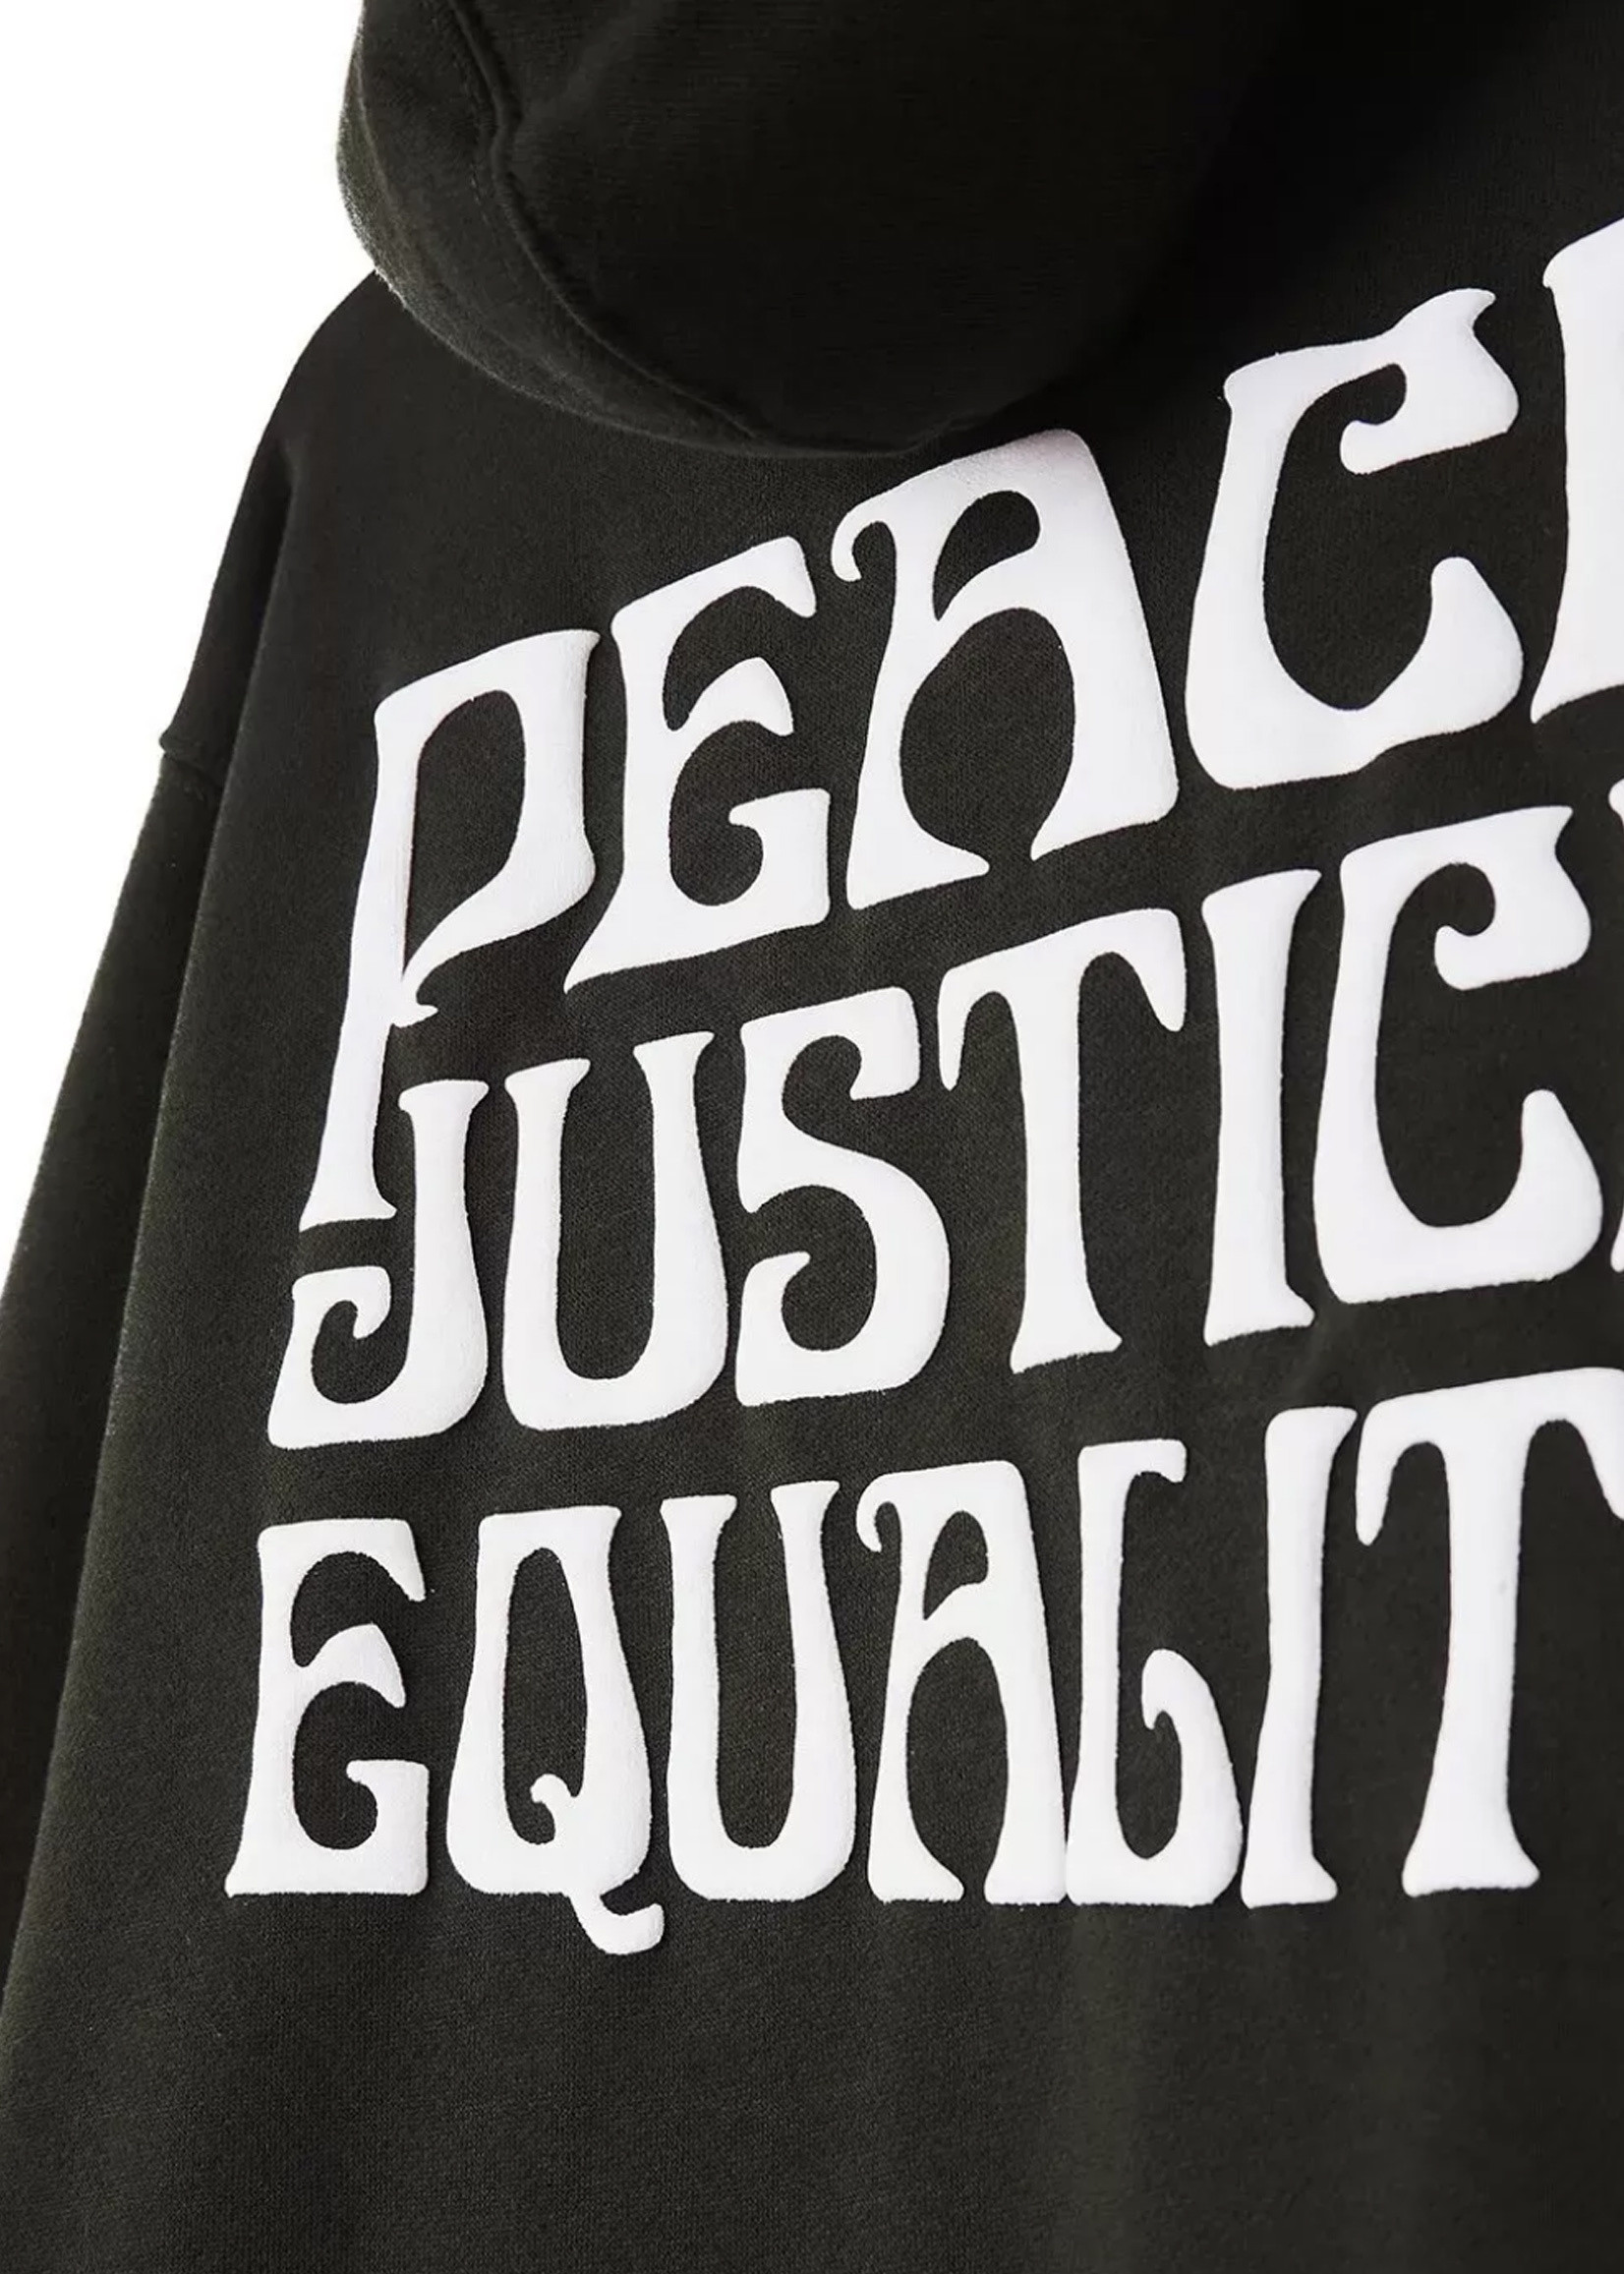 OBEY OBEY / Peace Justice Equality